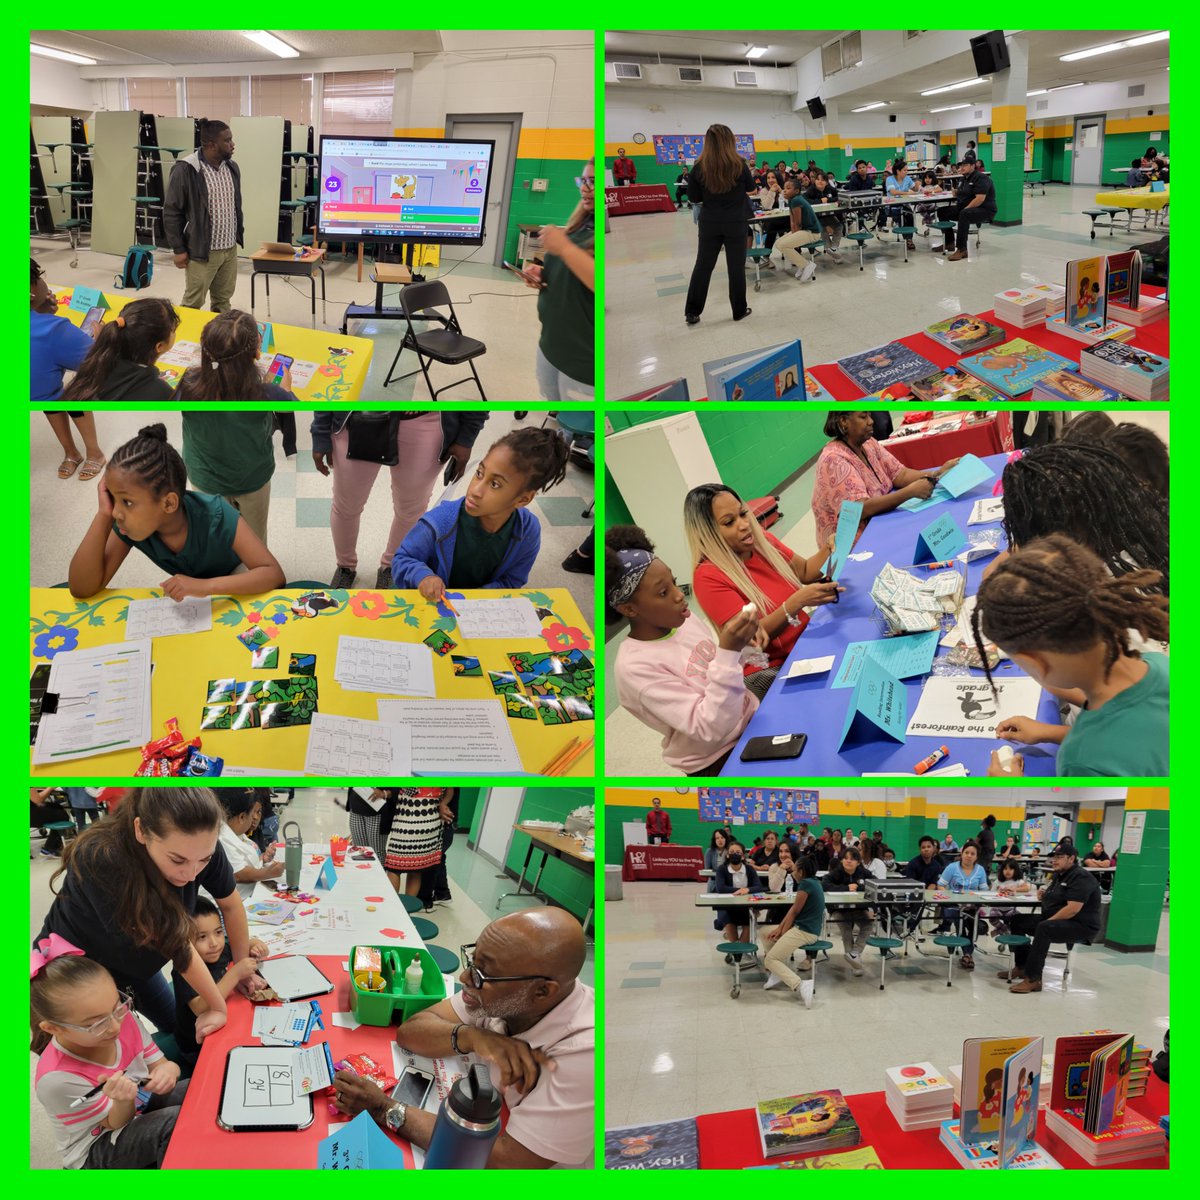 That's a wrap for Family Literacy Night with partners @HoustonAreaUL! Families learned about supporting literacy at home, kids got 4 free @Scholastic books, visited the book Fair, and everyone took home @FrenchysChicken meals!